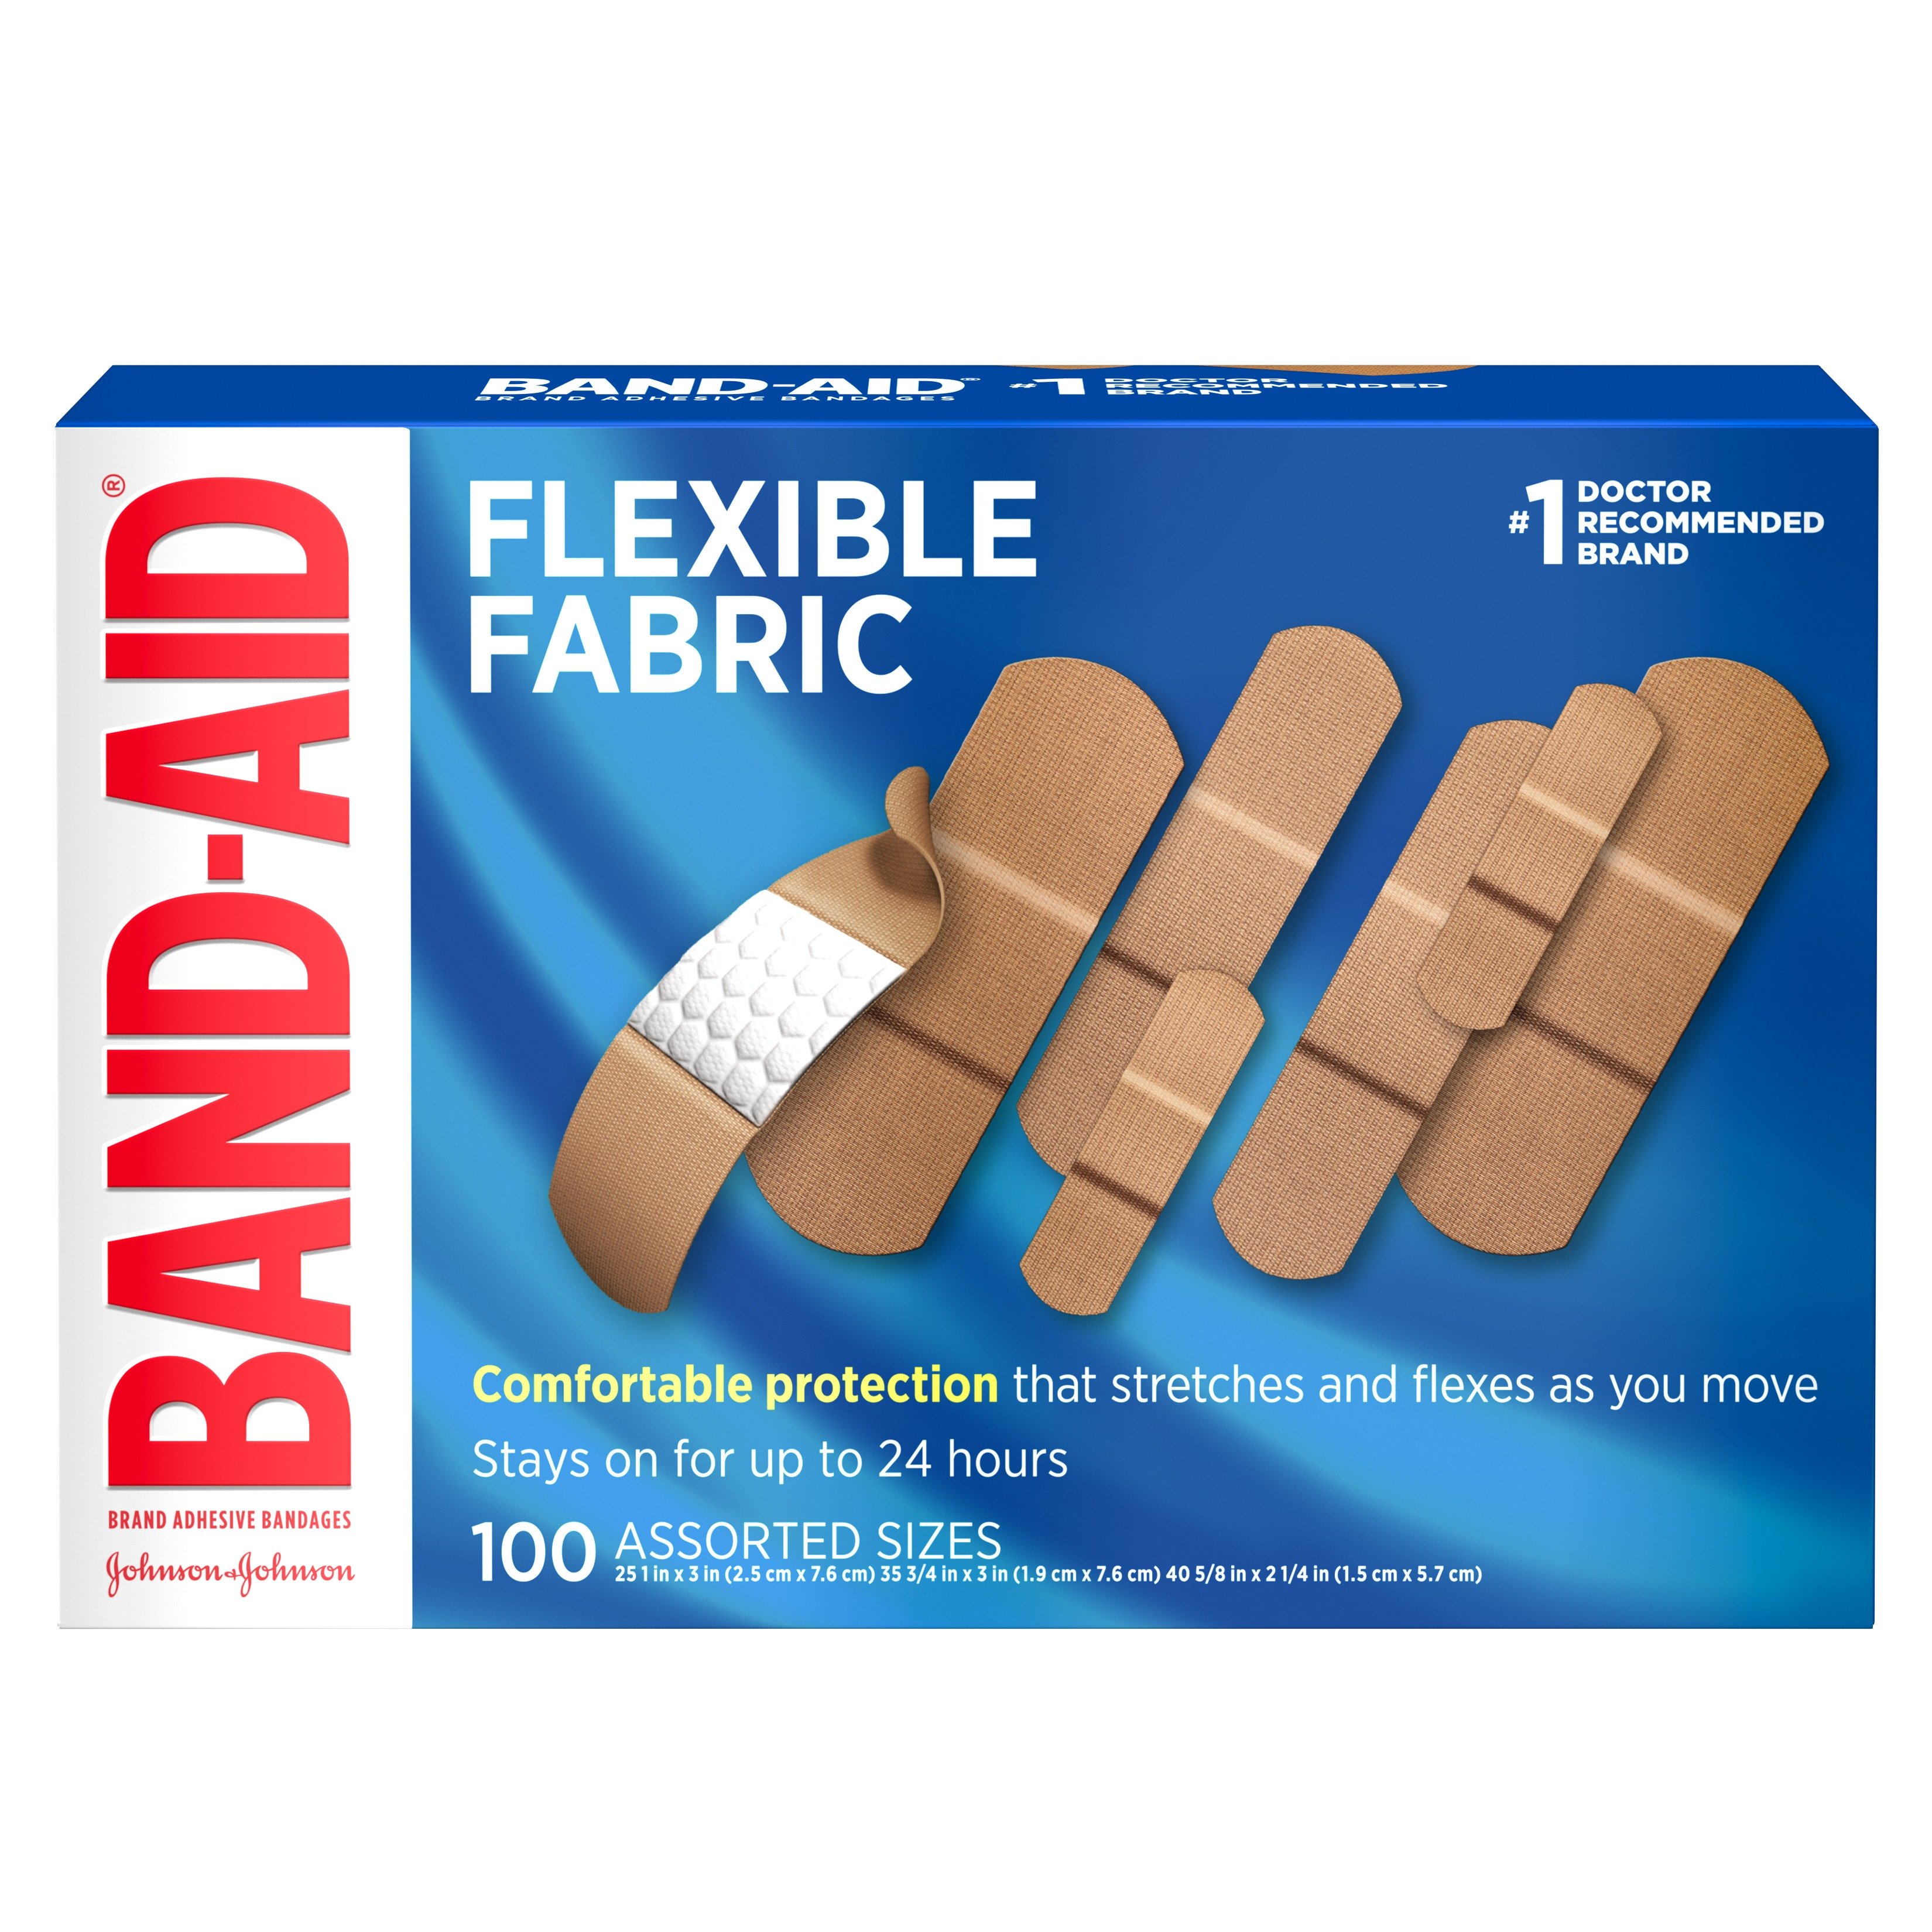 Band-Aid Flexible Fabric Adhesive Bandages, Flexible Protection Care of  Minor Cuts Scrapes, Quilt-Aid Pad for Painful Wounds, Dark Brown Skin Tone  BR65, Assorted Sizes - 30 ea